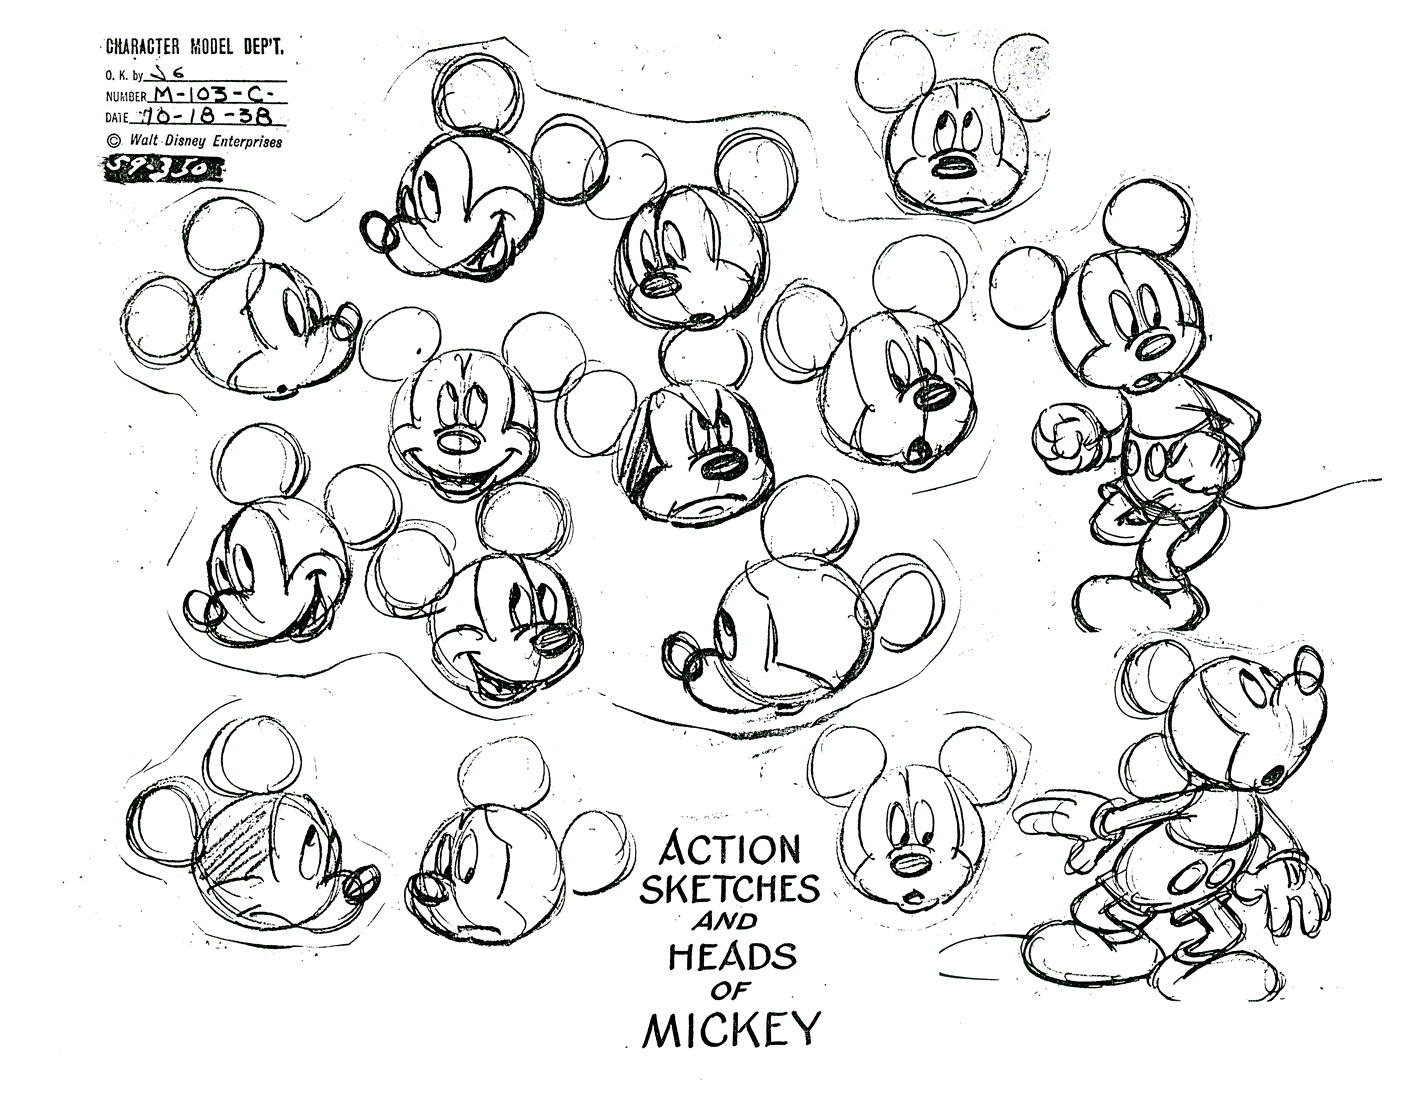 Coloring page of Mickey's facial expressions: happy, sad, angry, surprised, shy amd many others